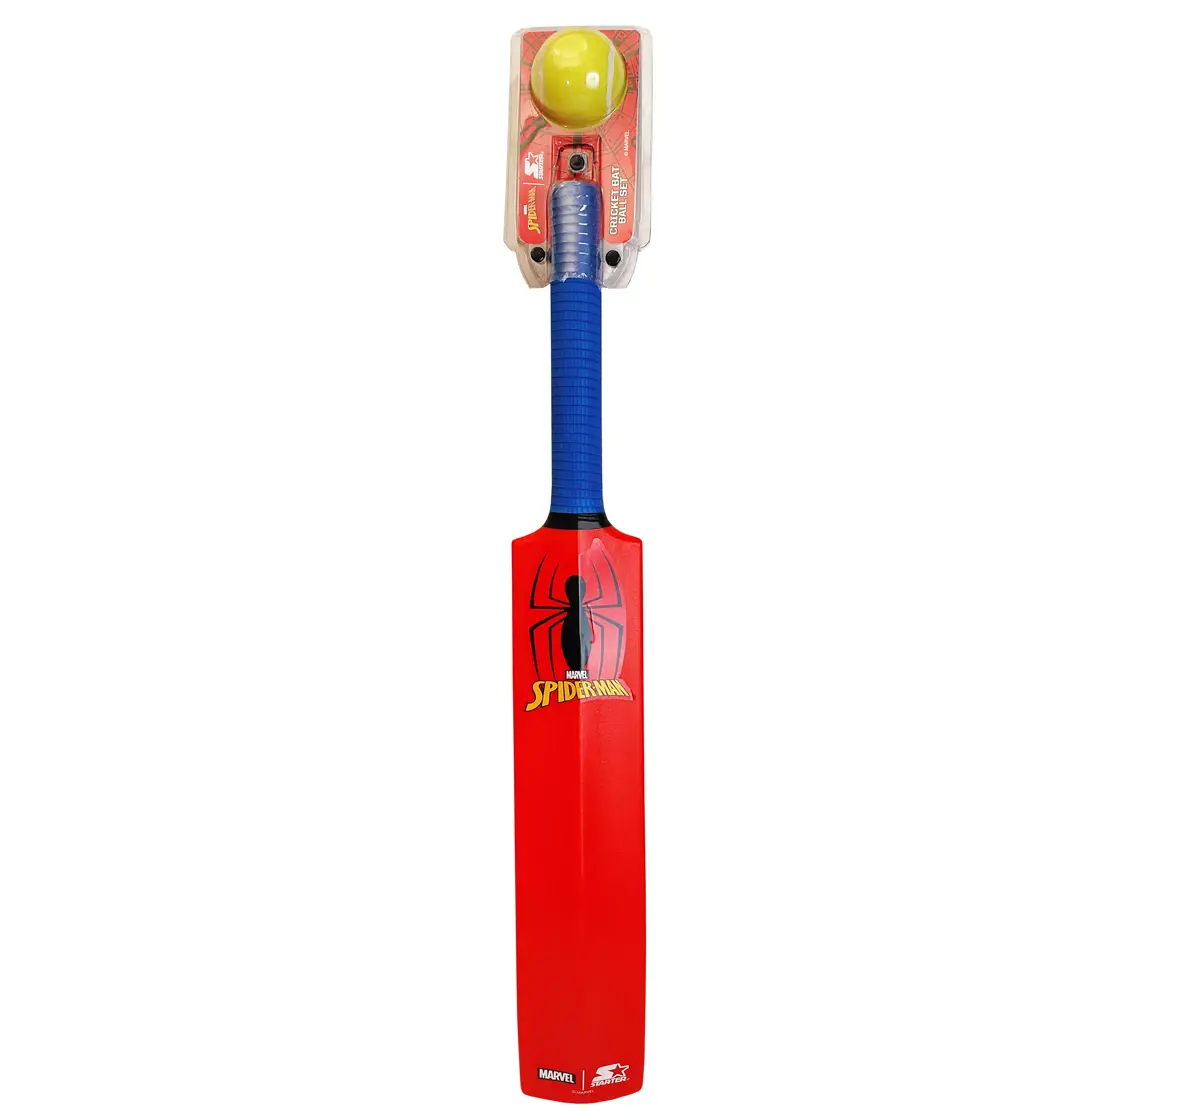 Starter Spider Man Bat And Ball Cricket Set Size S Multicolour, 3Y+